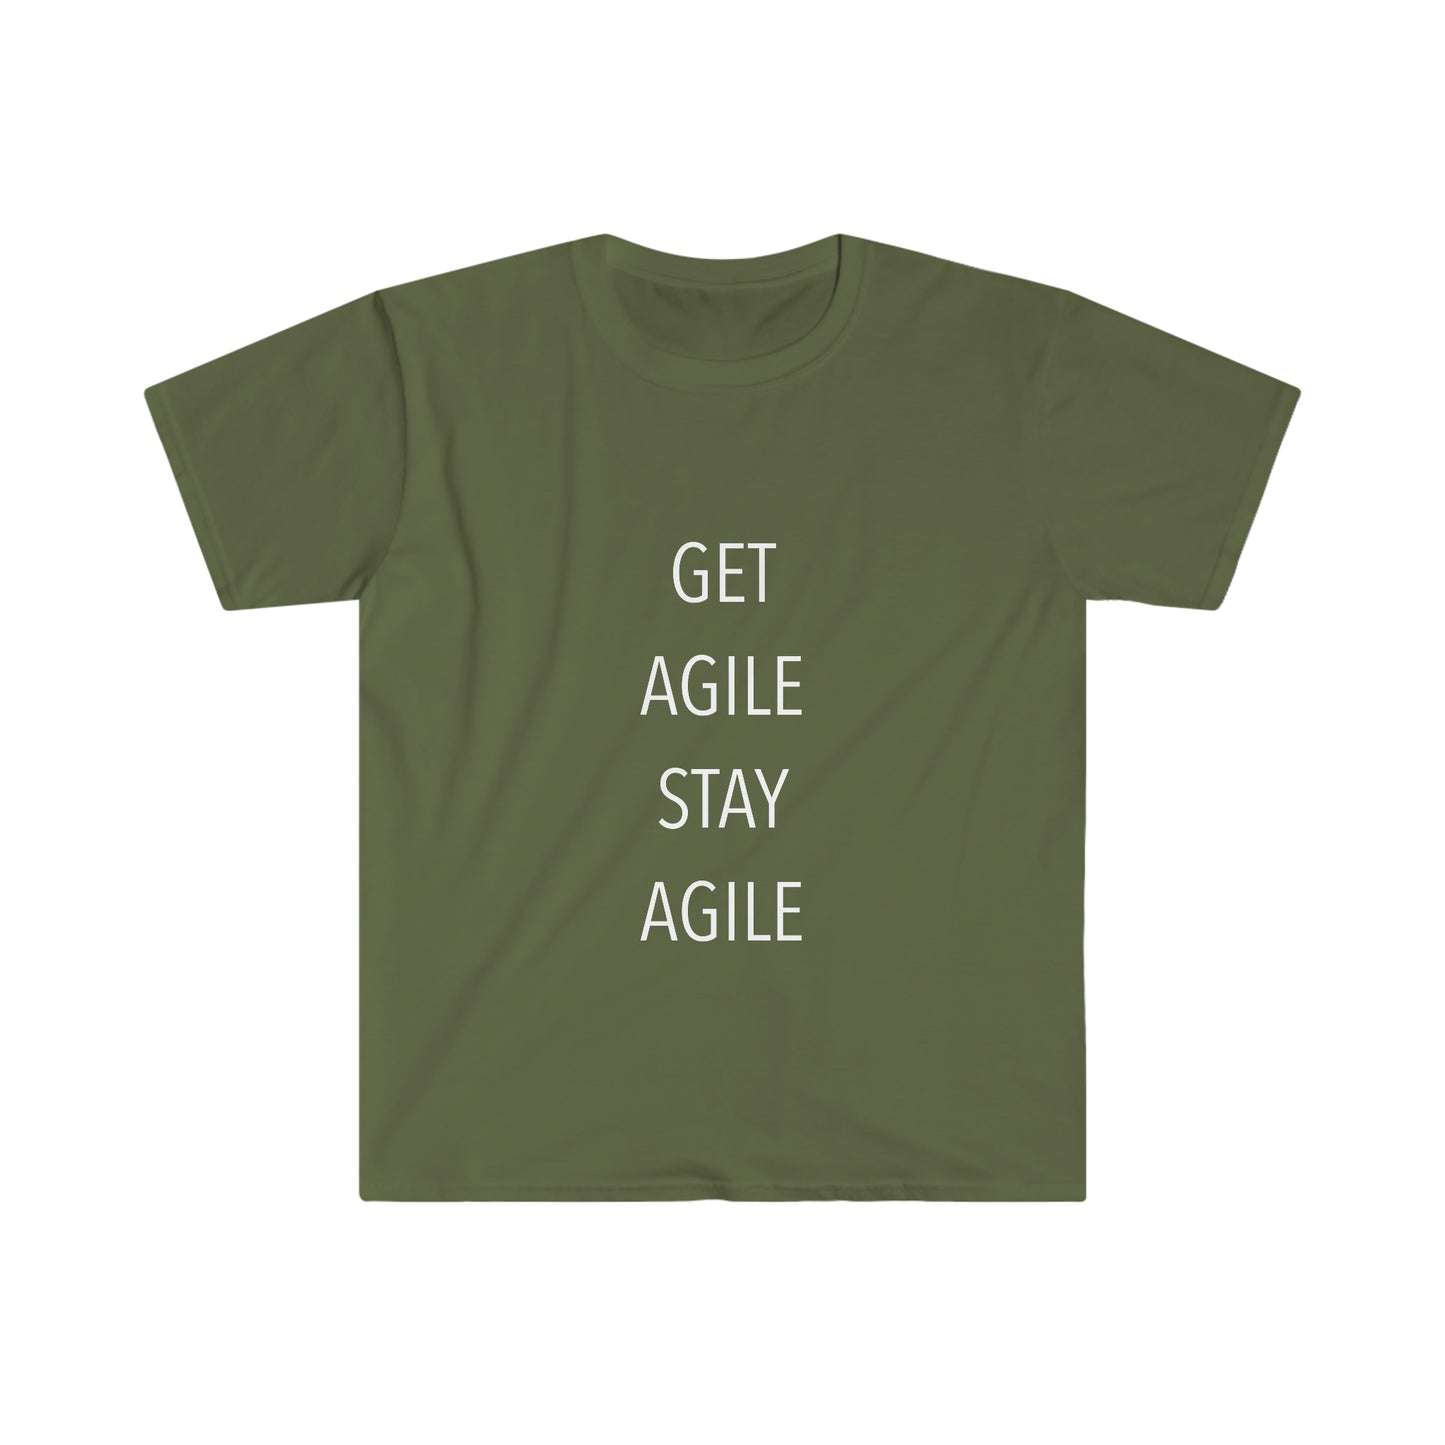 Get Agile. Stay Agile. - T-Shirt by Wisconsin Agility